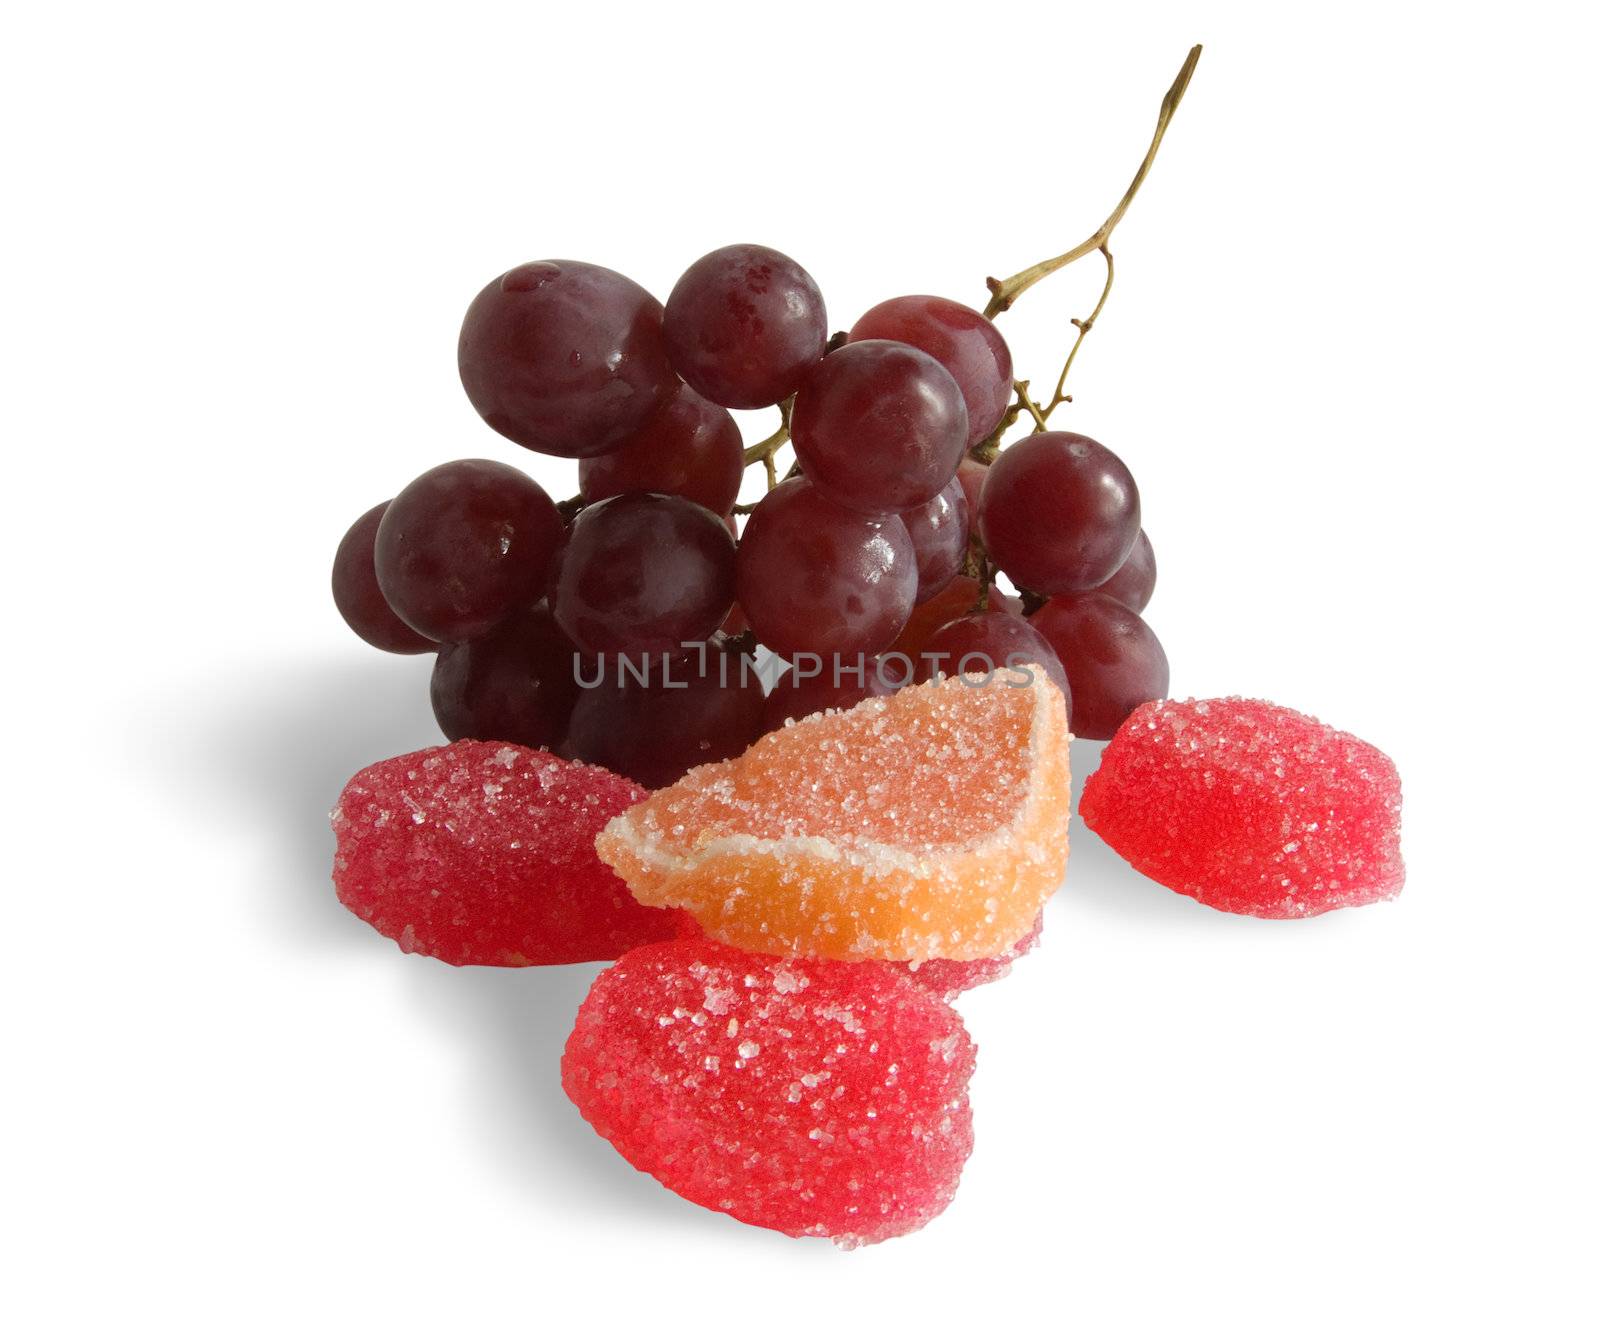 Vine and fruit jellies  by Jim